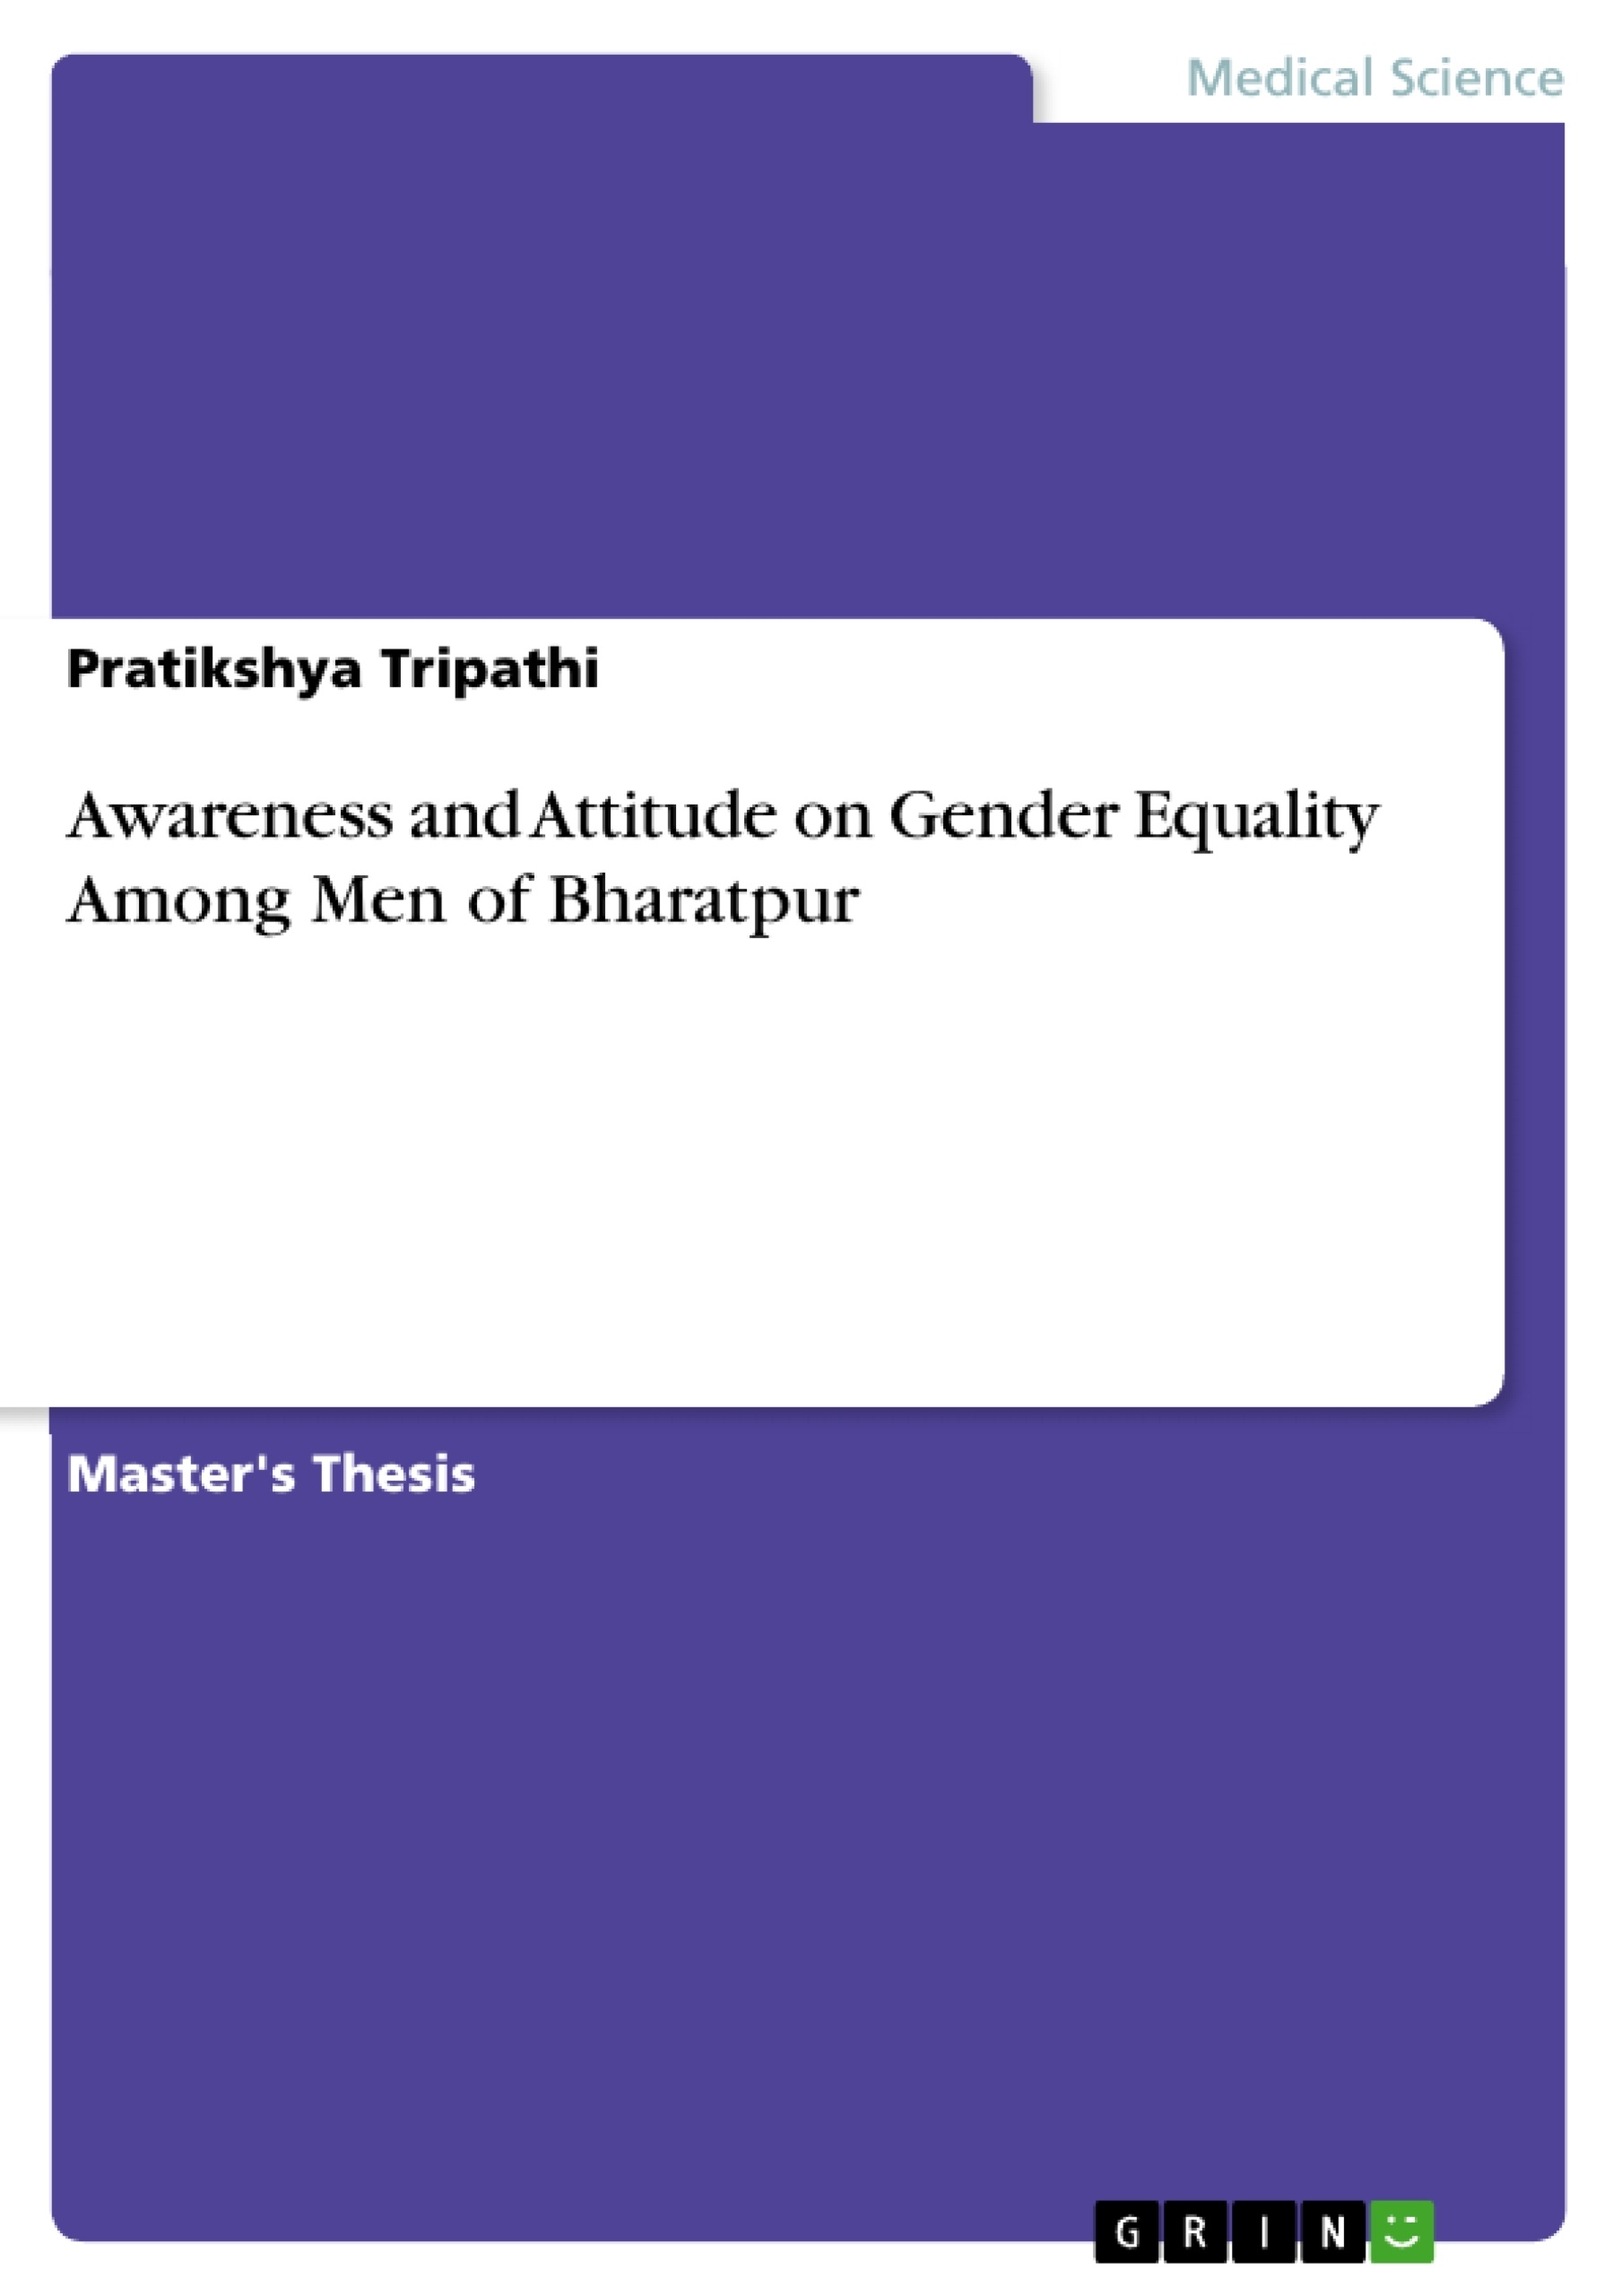 Título: Awareness and Attitude on Gender Equality Among Men of Bharatpur